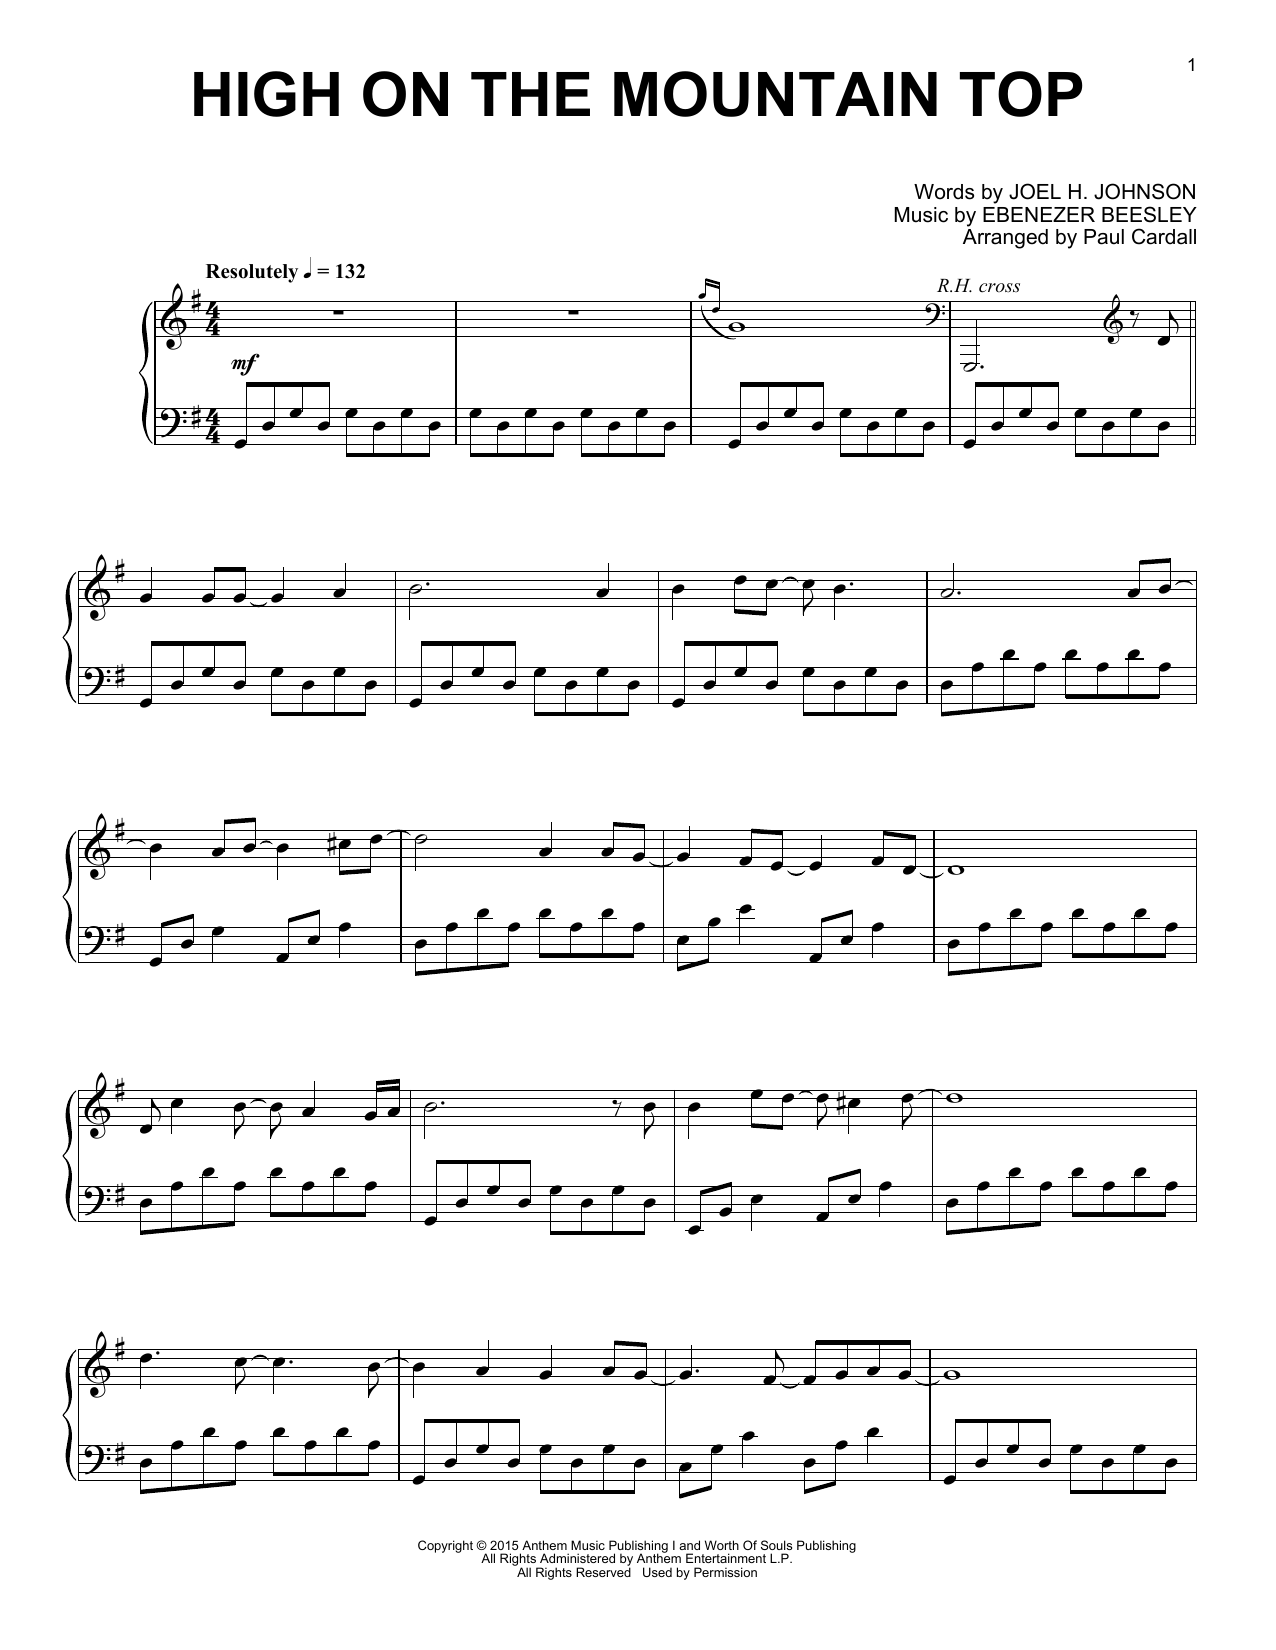 Download Paul Cardall High On The Mountain Top Sheet Music